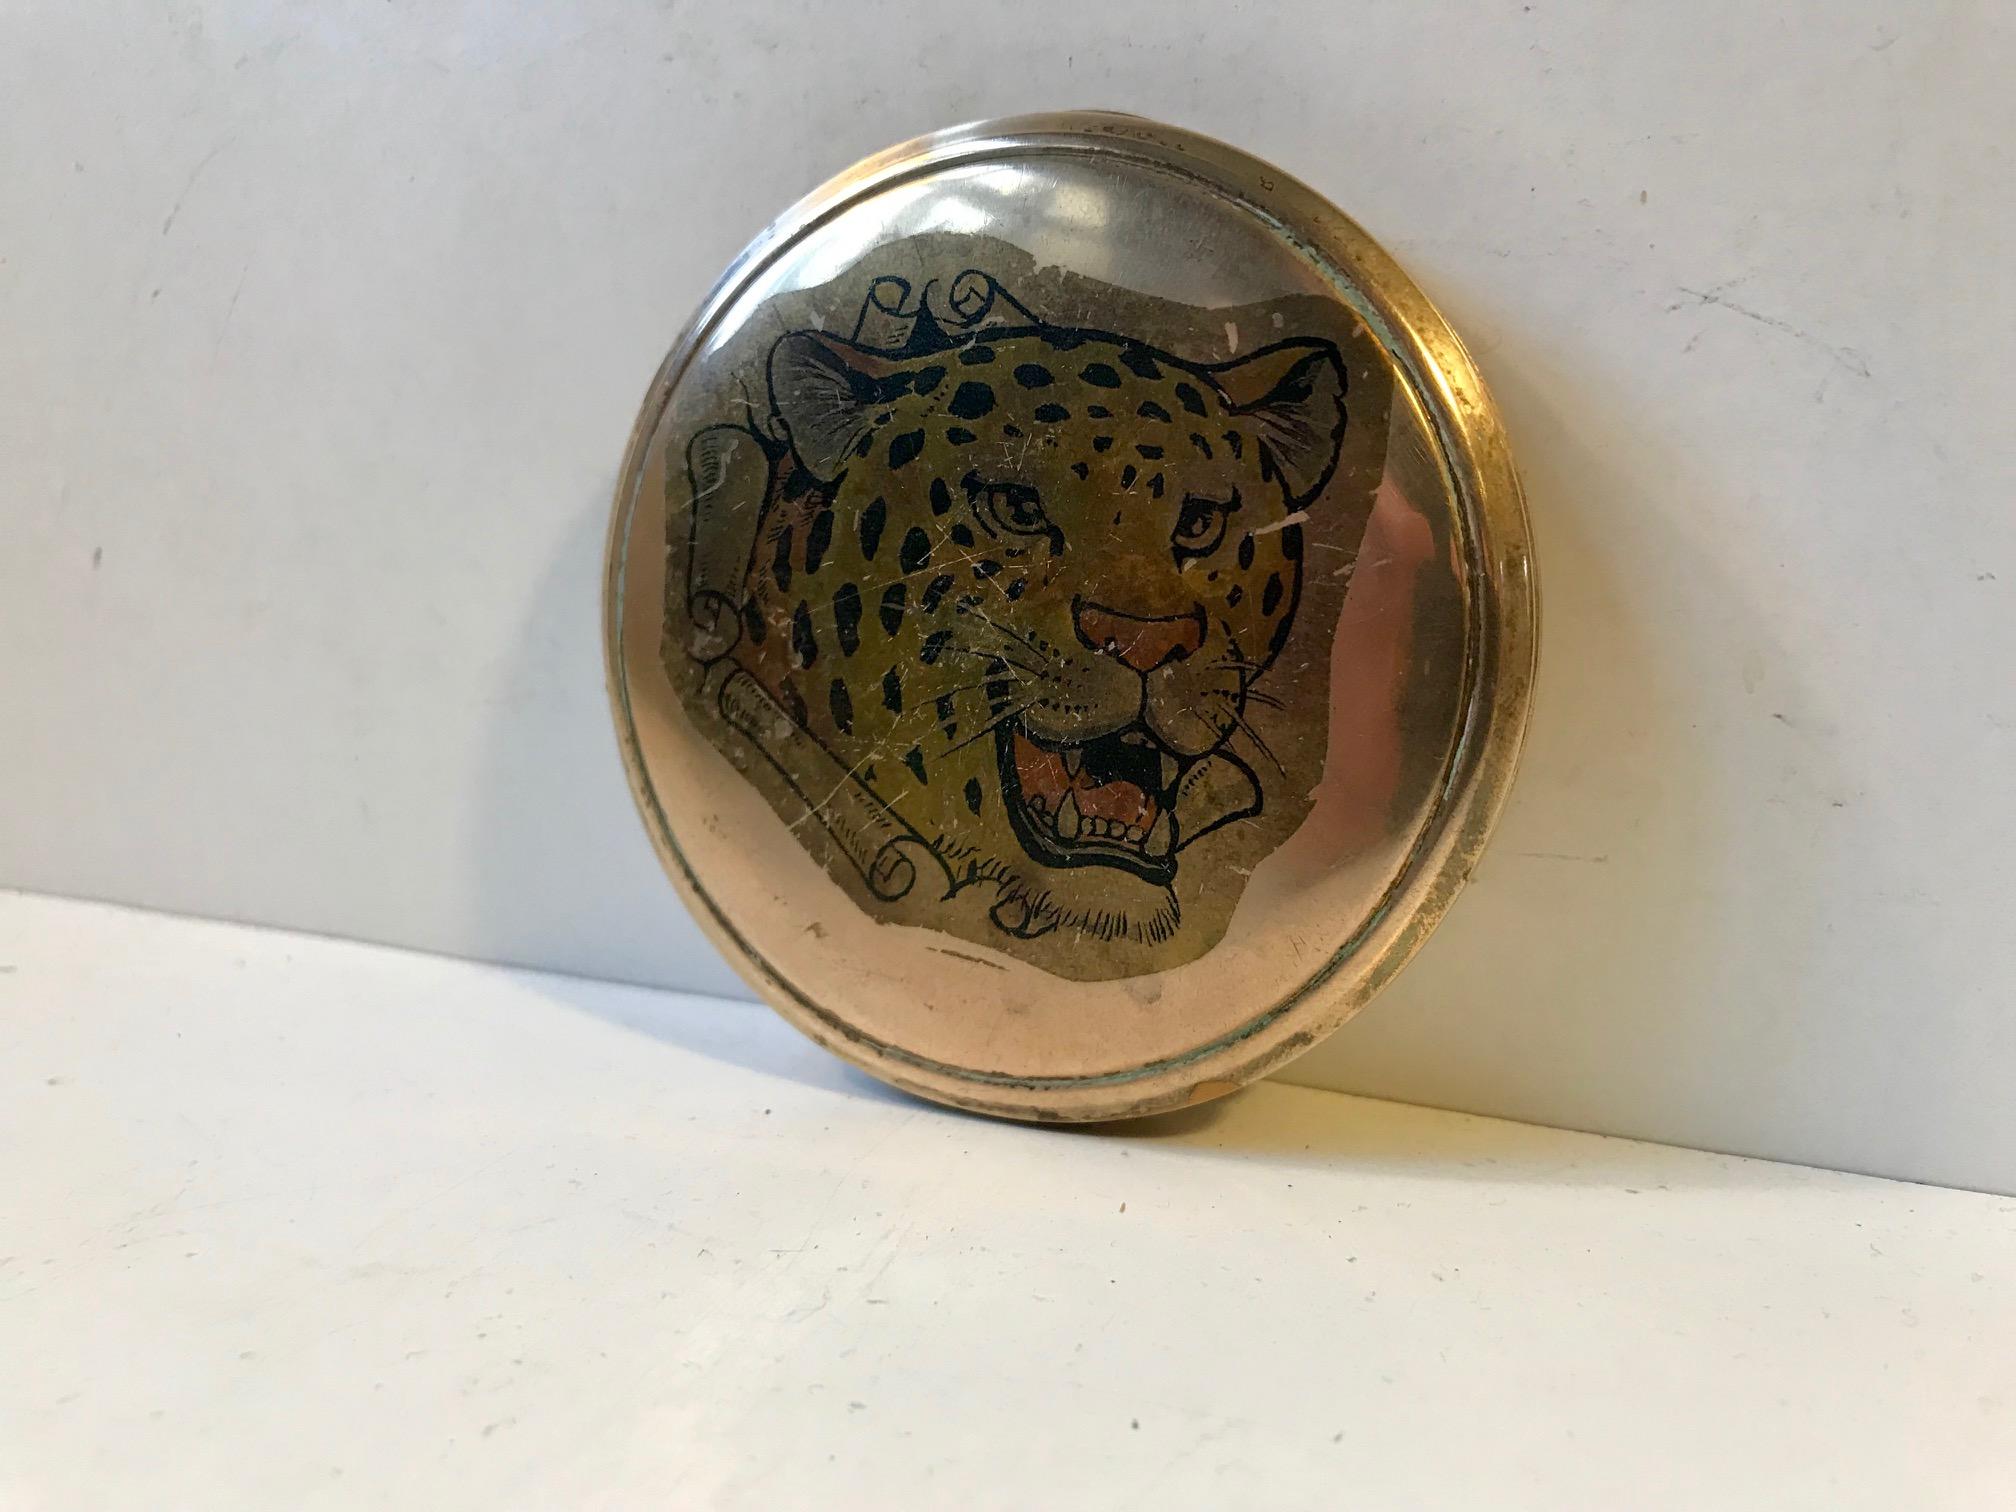 A powder compact or pocket mirror also suitable for pills, snuff etc. It is fashioned out of solid brass and has a front with intricate Guilloché. Both the front and backside has a tiger motif created through a process with different acids, leaving